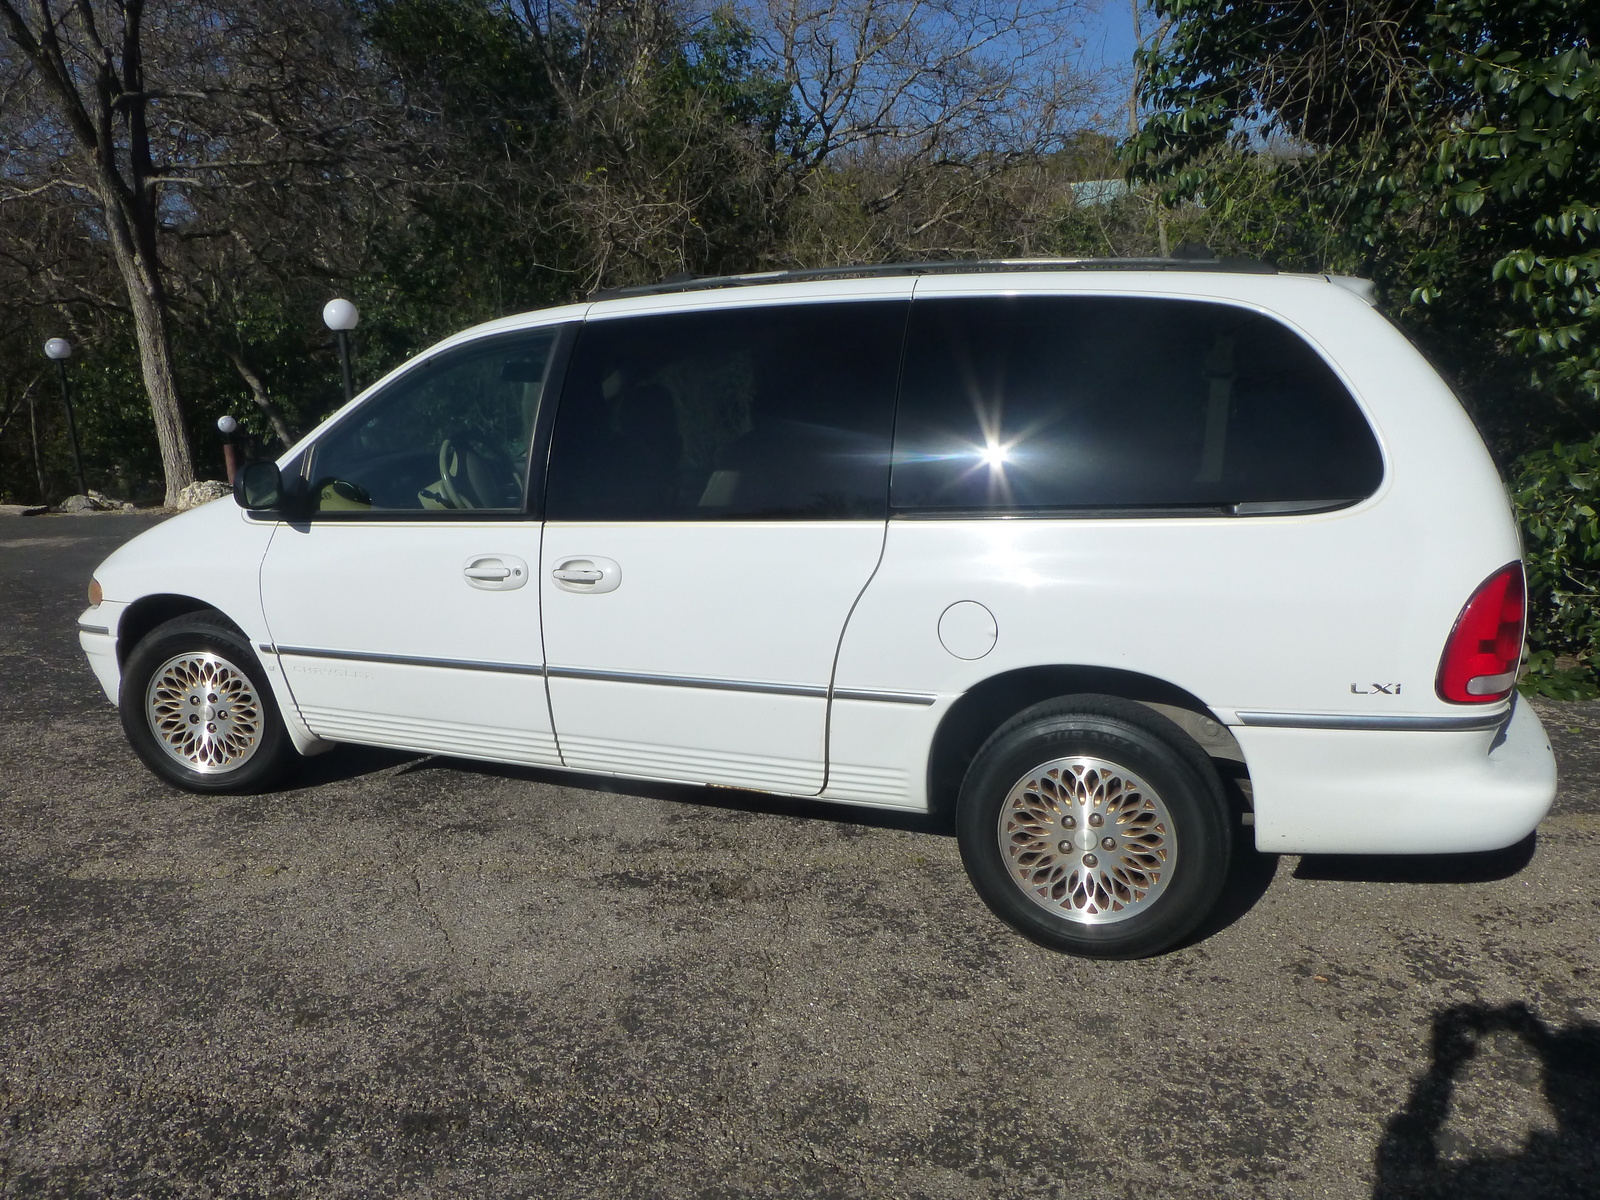 1996 Chrysler town country lxi specs #3